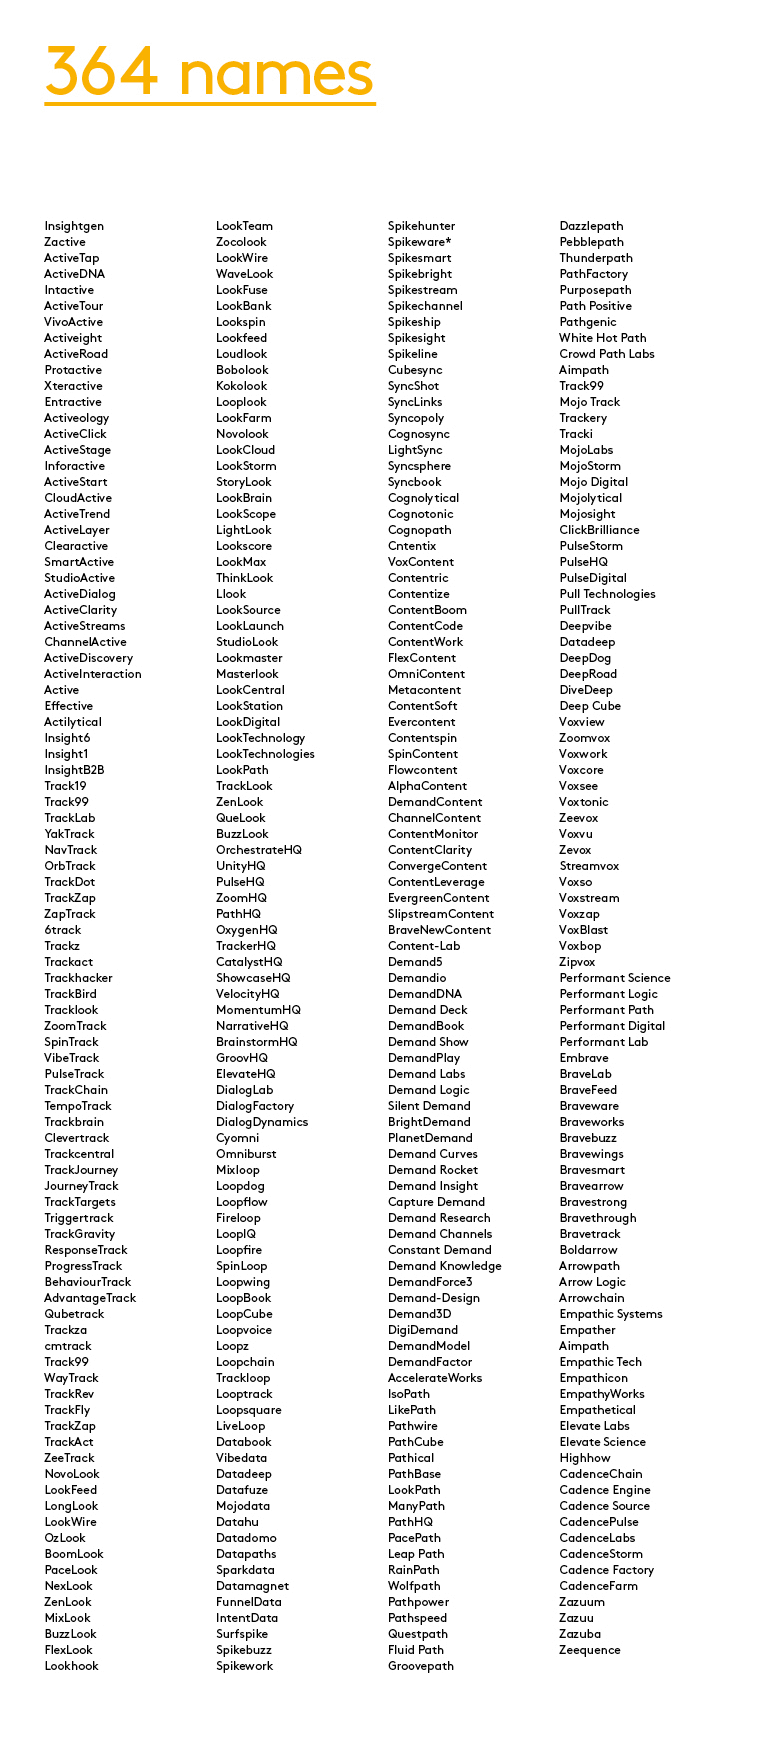 re-naming - the long list